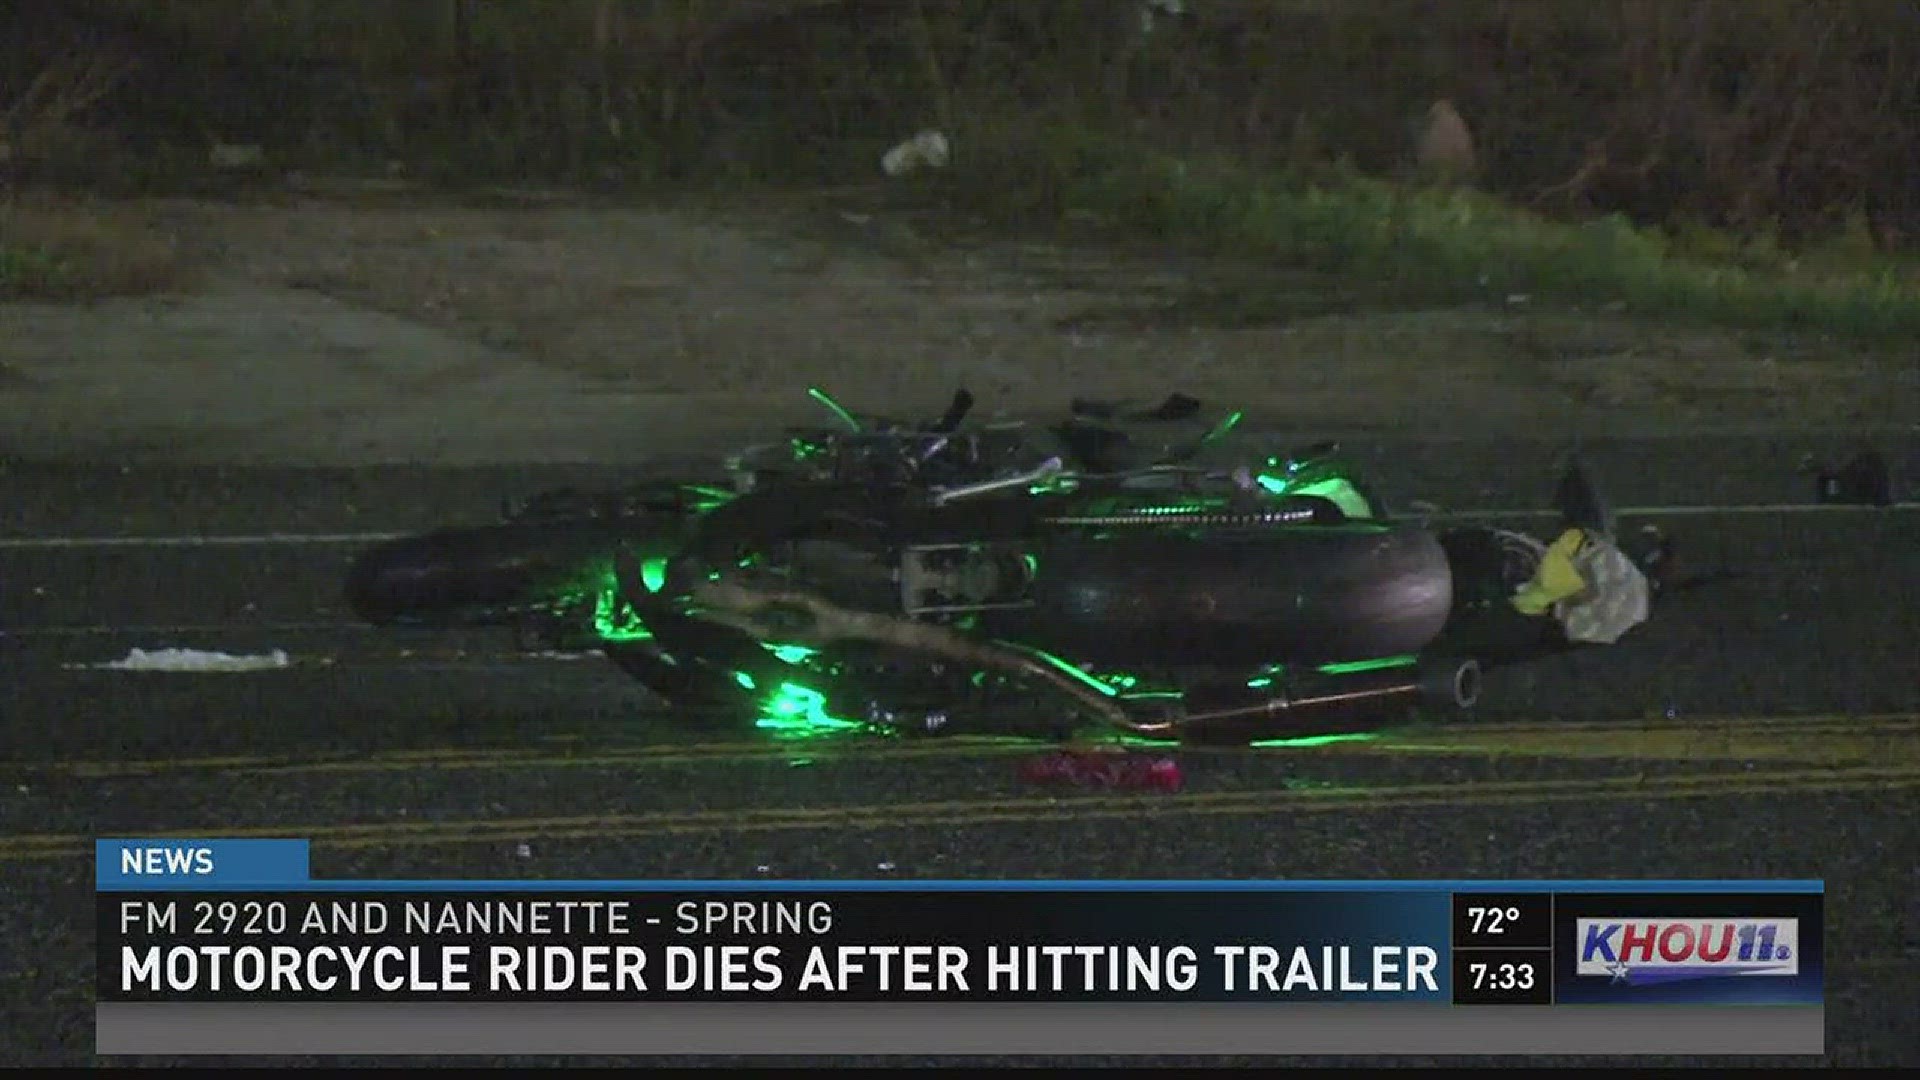 A motorcycle rider died after slamming into the back of a flatbed trailer on FM 2920 in north Harris County overnight.